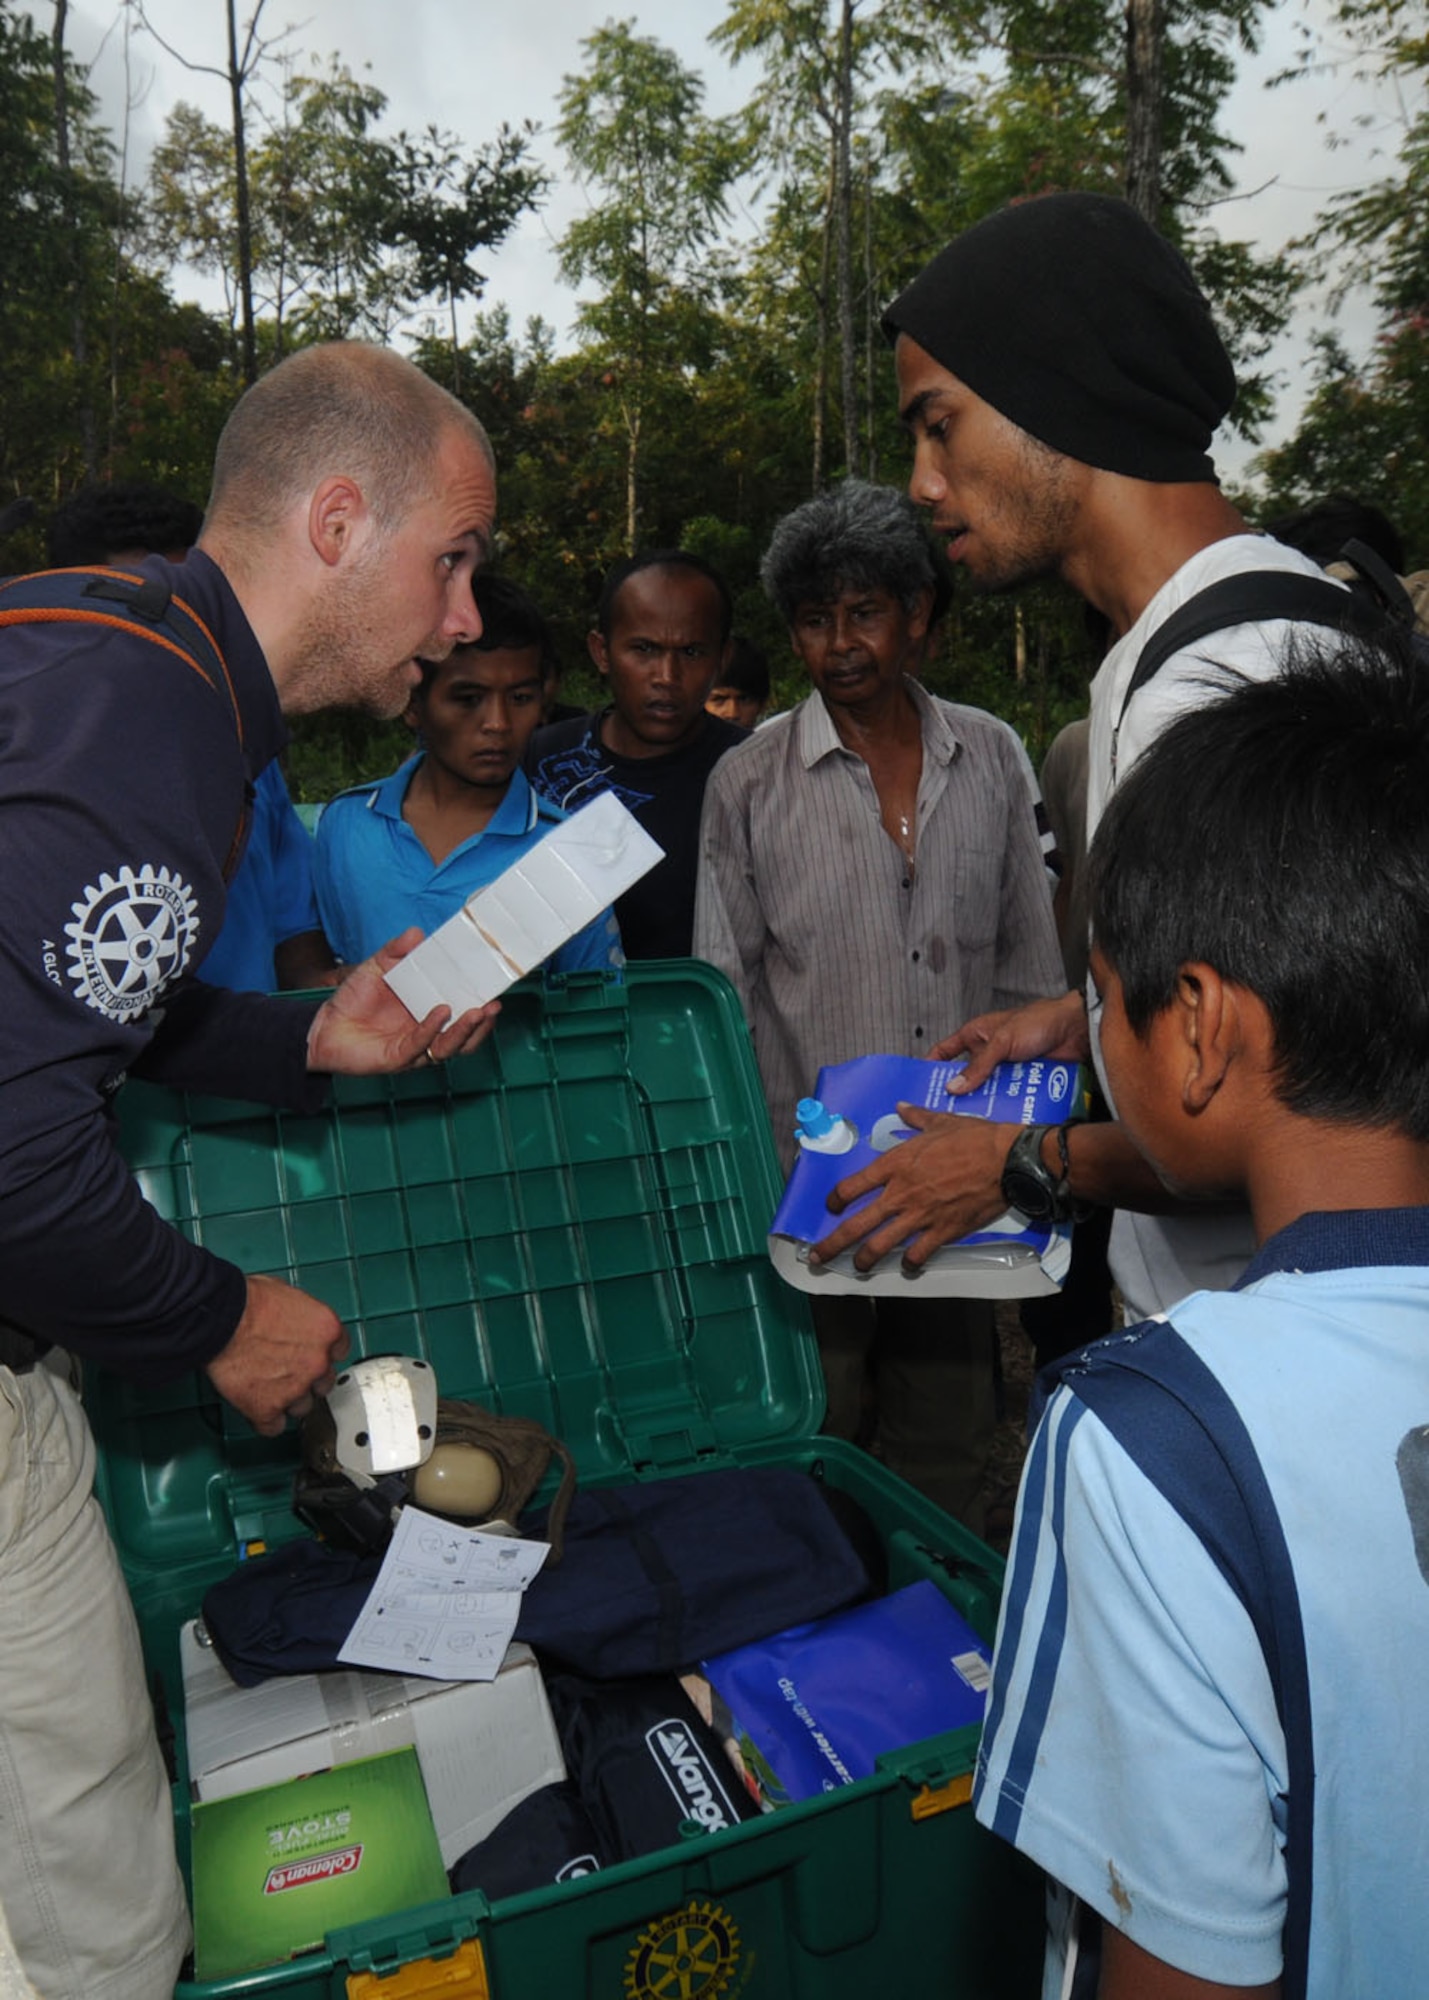 Shane Ravill (left), a ShelterBox Trust volunteer, gives an Indonesian villager a demonstration on using water purification tablets Oct. 11. ShelterBox Trust, an international disaster relief charity that delivers emergency shelters to people affected by disasters, donated emergency relief boxes following earthquakes that struck Indonesia Sept. 30. Each box contains a ten person tent, multi-fuel stove, blankets, water purification tablets, basic tools and cookware among others. The U.S. military, including a 71-member Air Force Humanitarian Assistance Rapid Response Team, is also in Indonesia assisting in relief operations throughout Indonesia. (U.S. Air Force photo/ Staff Sgt. Veronica Pierce)